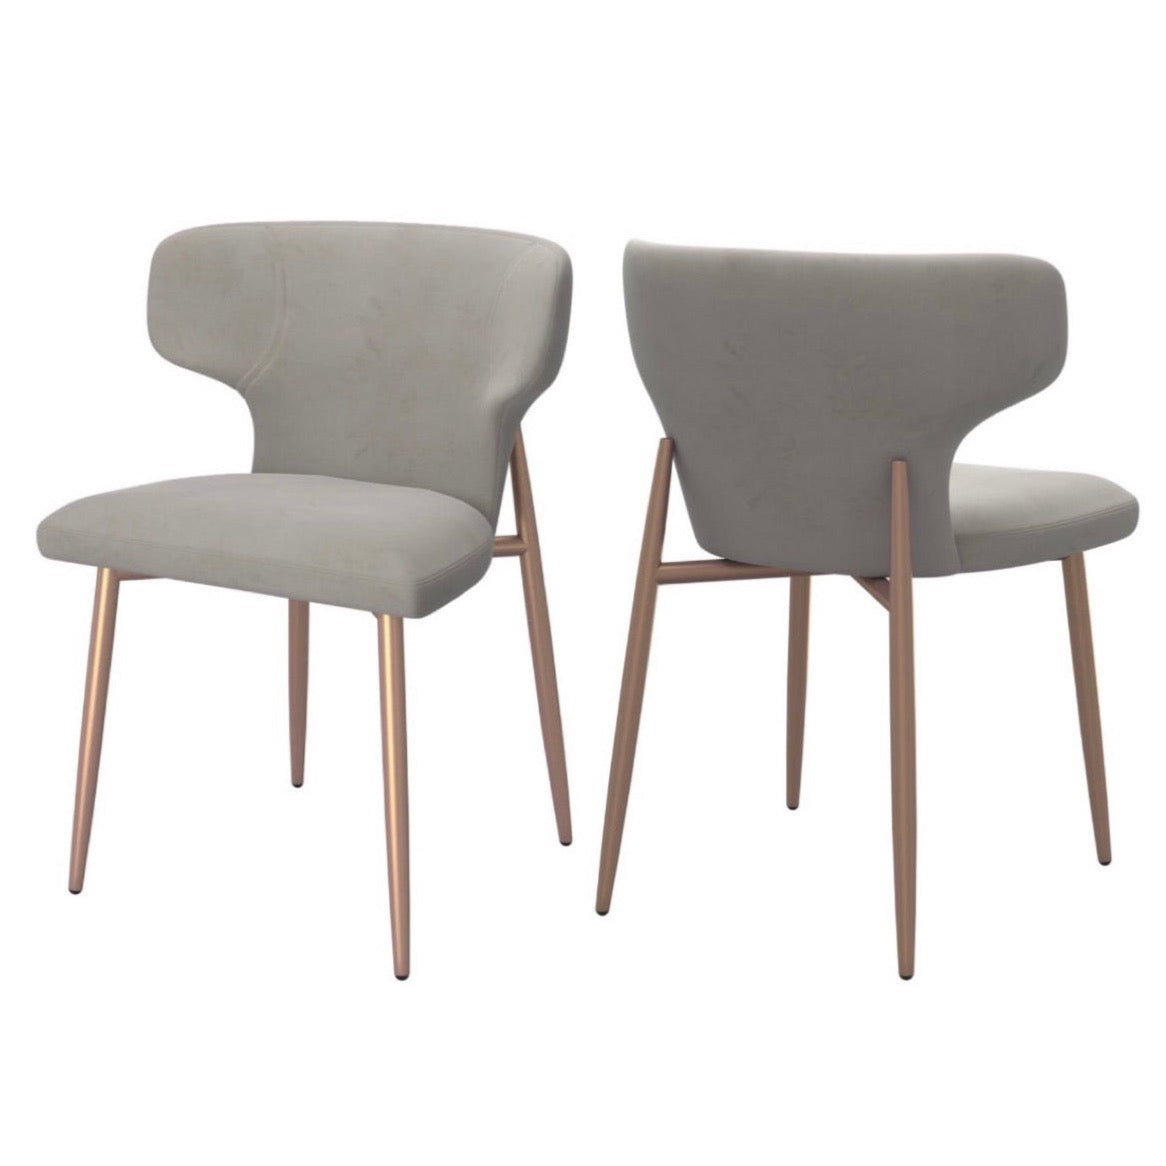 AKIRA 2 GREY AND AGED GOLD CHAIRS